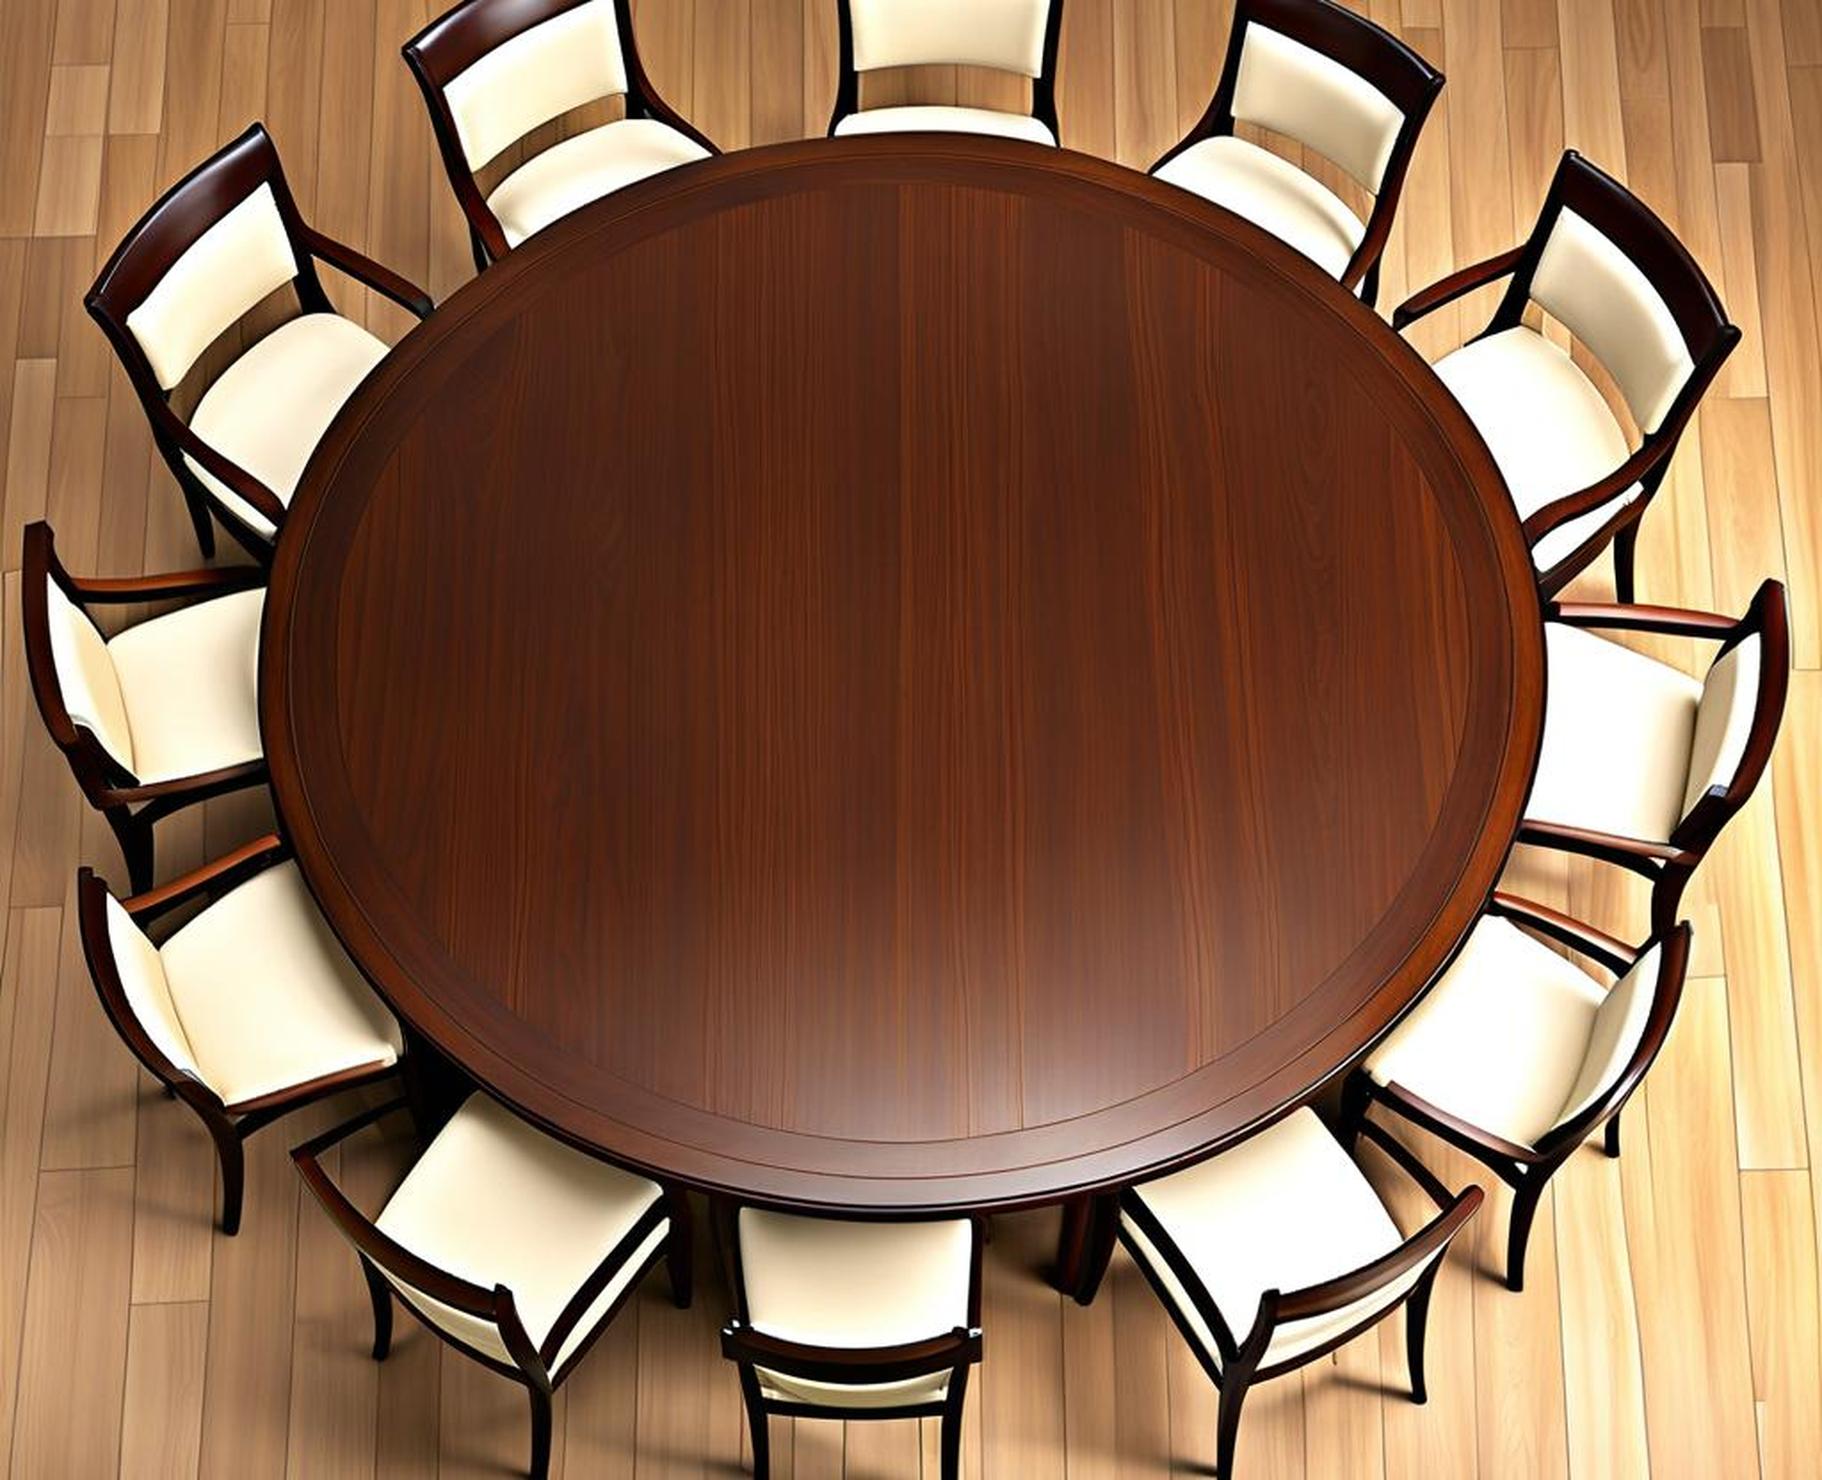 Make Room for More with a Spinning Expandable Round Table